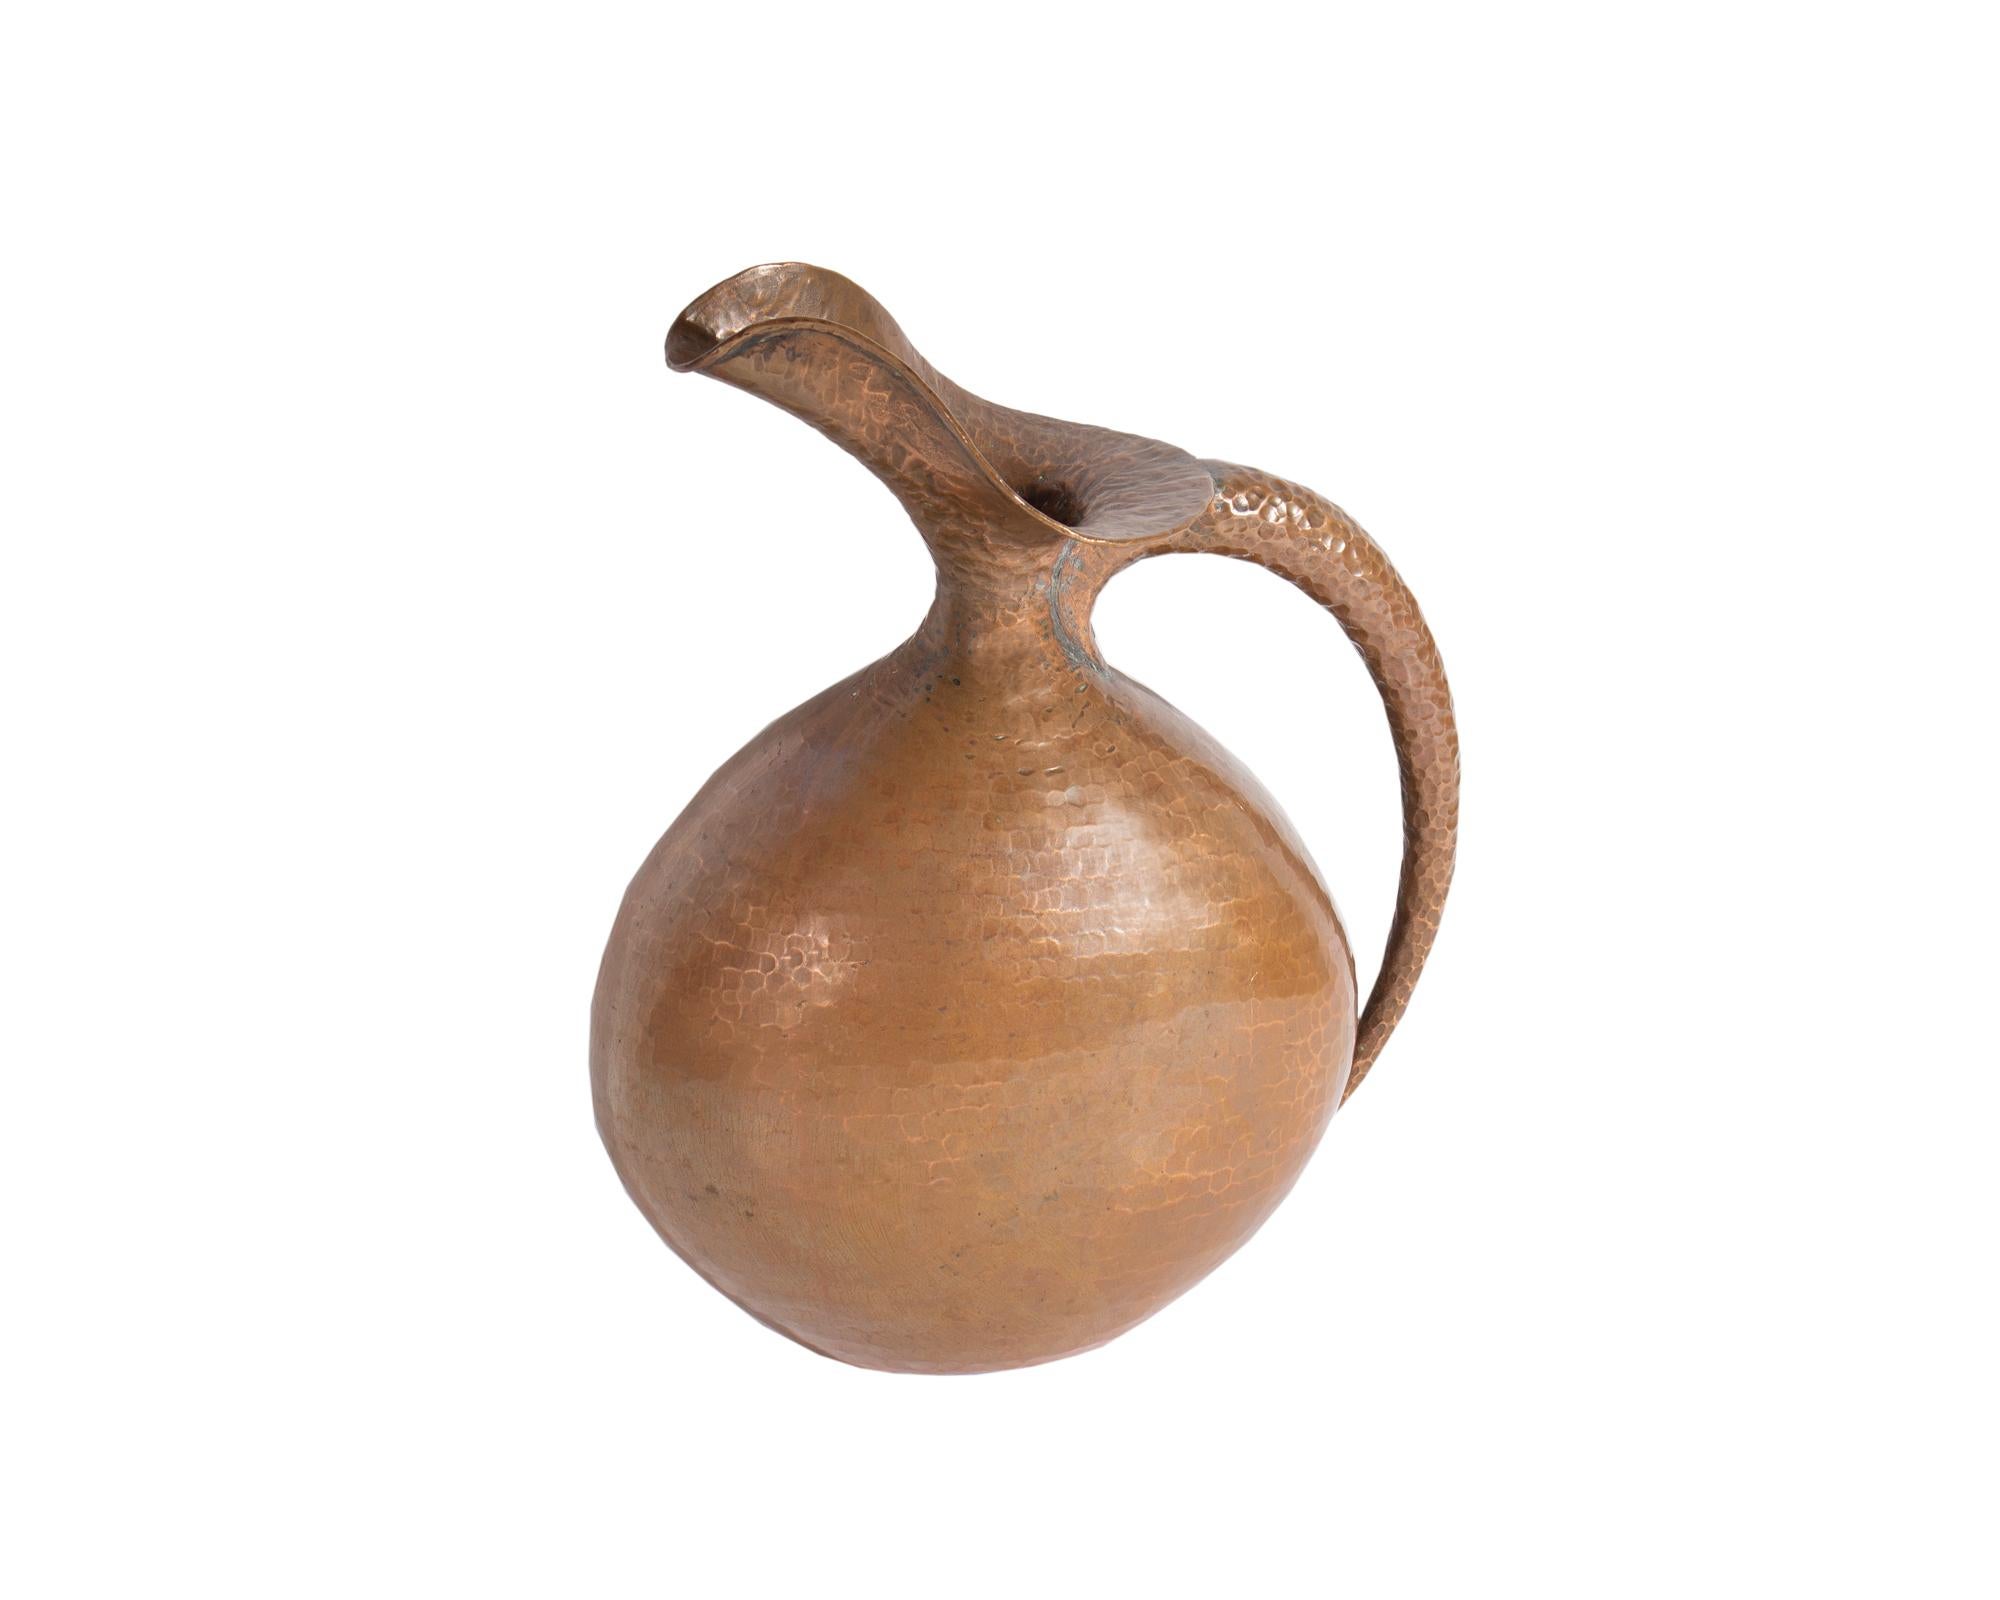 A hammered copper pitcher or ewer designed by the Italian designer Egidio Casagrande (1911-1962). This pitcher has a round body and tapered handle on one side. The underside of the pitcher is marked 